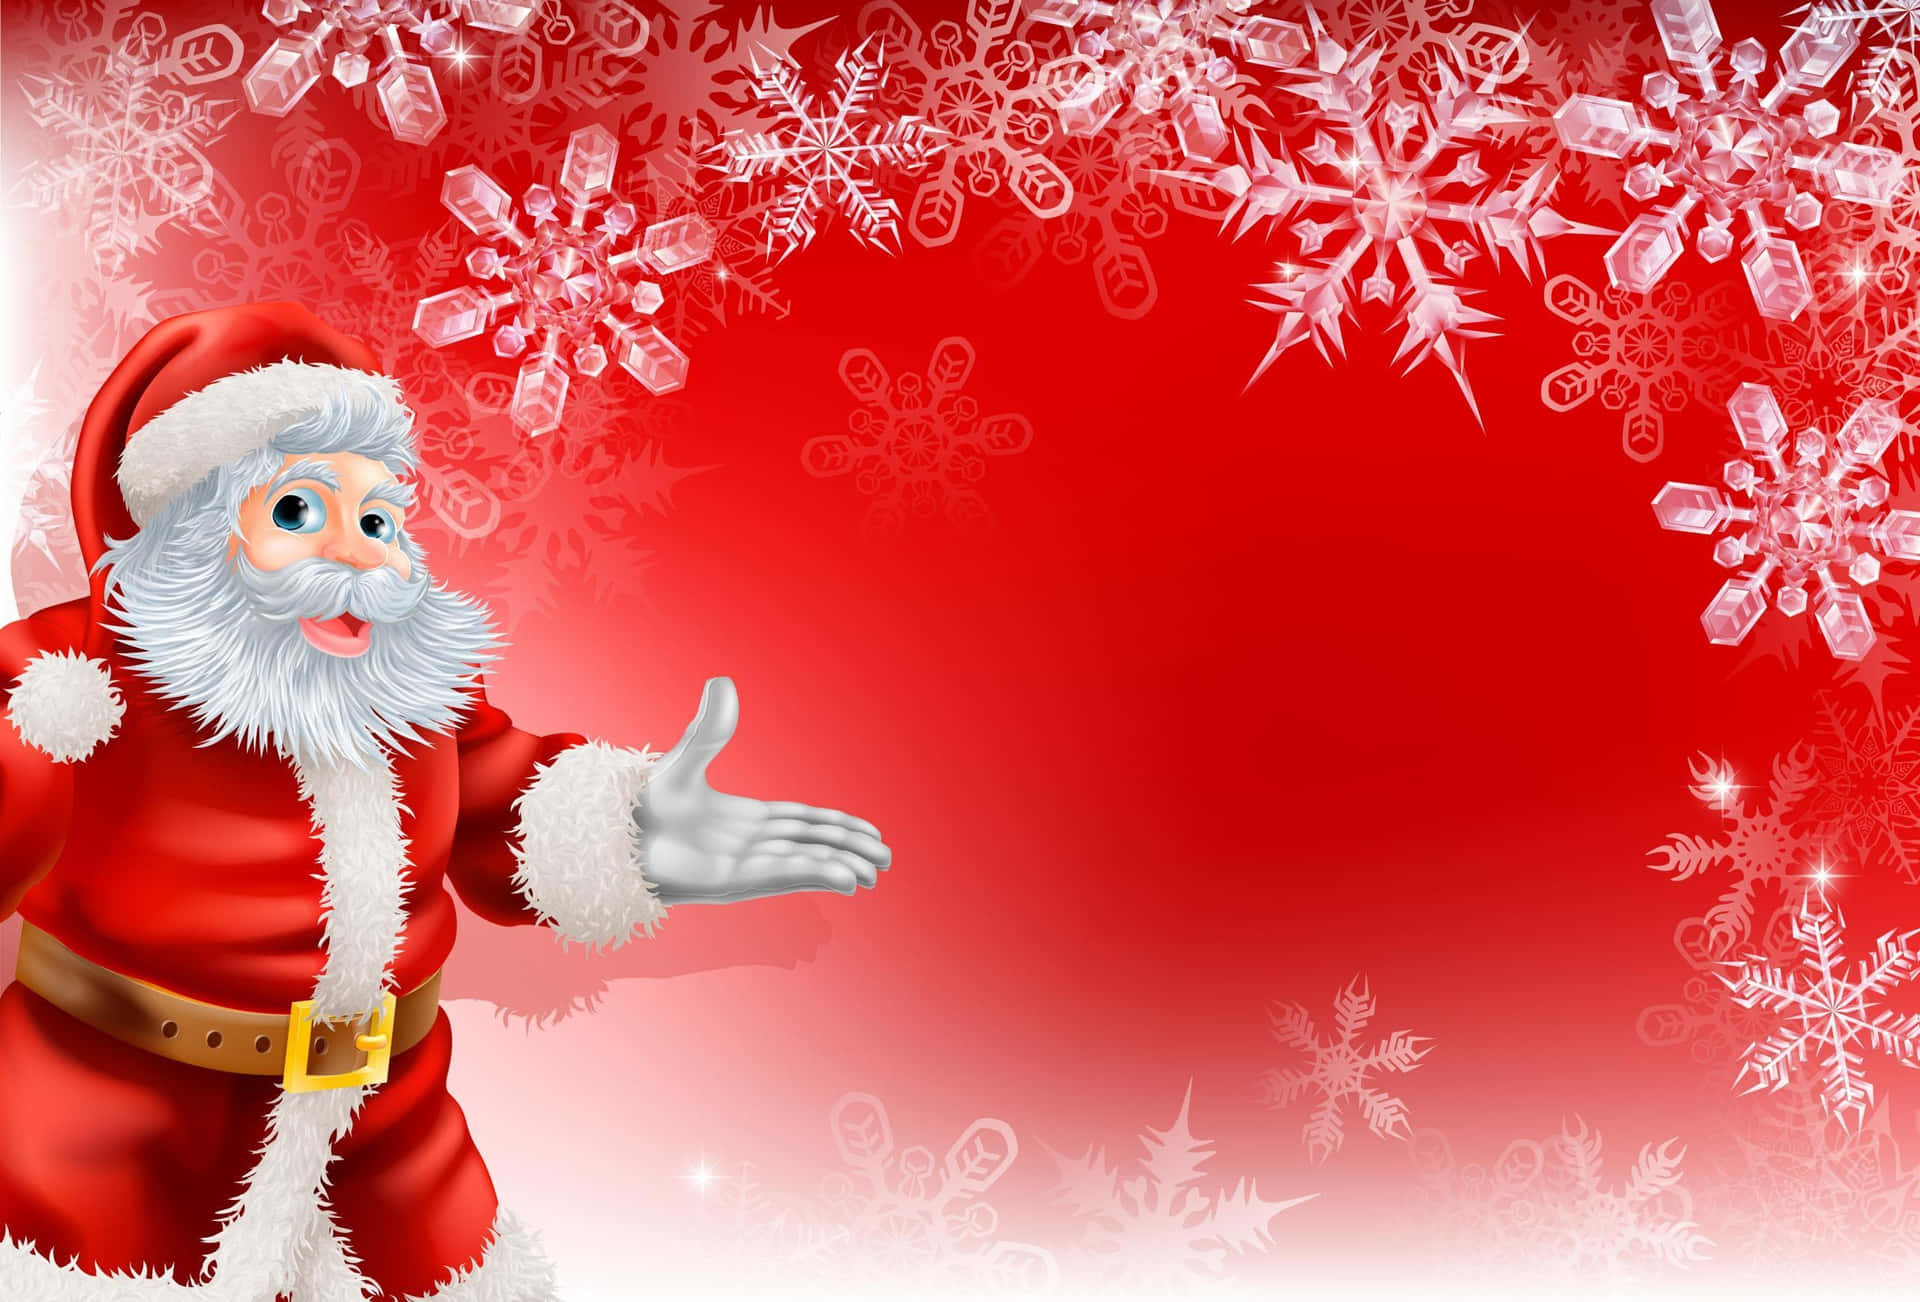 Jolly Saint Nick looking for the perfect present this Christmas Wallpaper